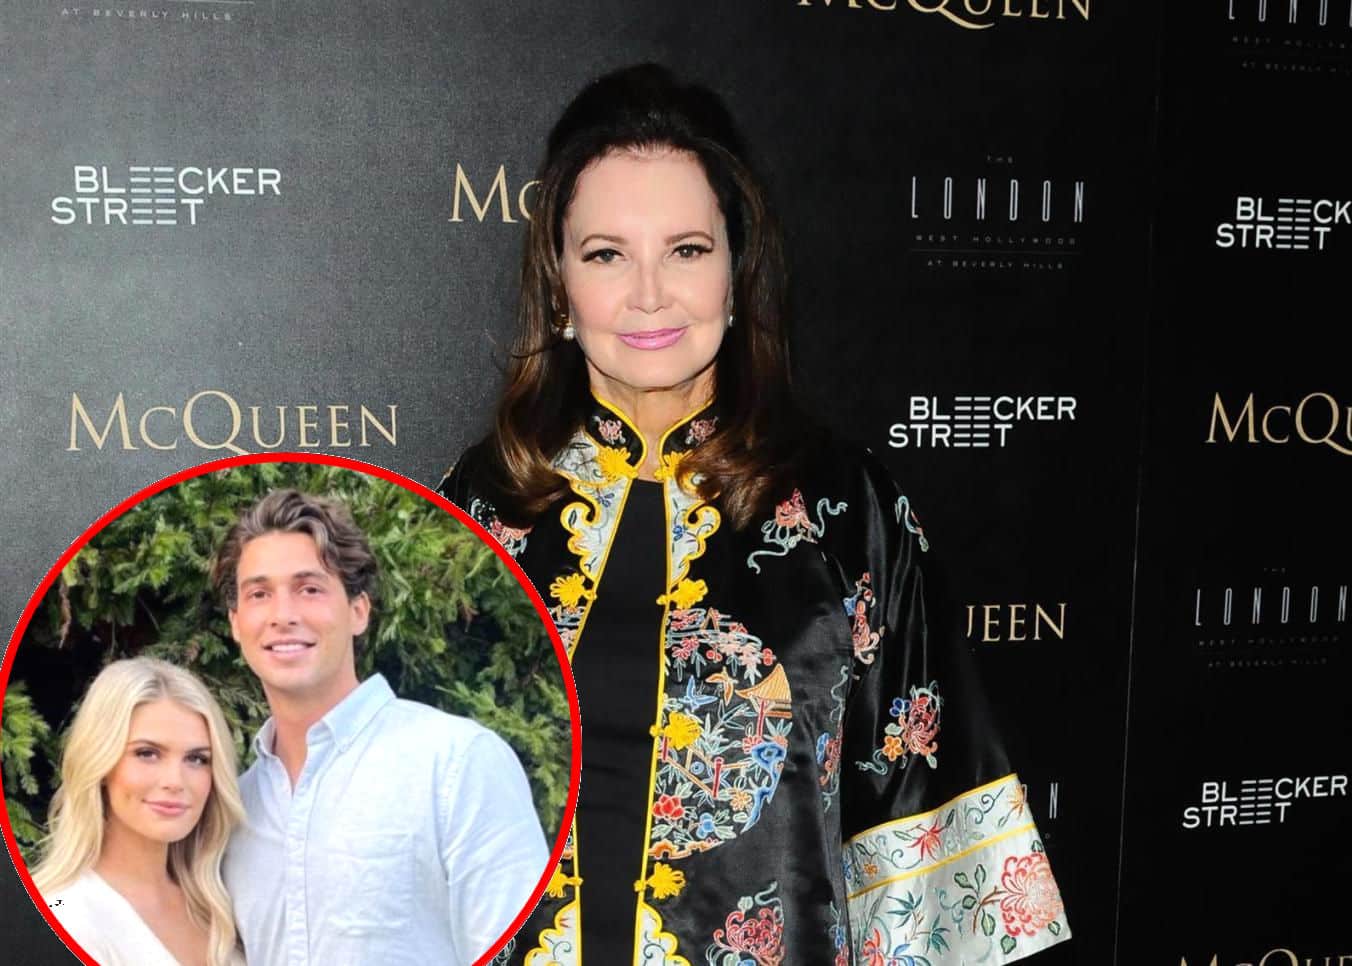 Southern Charm's Patricia Altschul Explains Why She Didn't Attend Madison LeCroy's Engagement Party, Says Season 8 is "Going to Be a Good One"